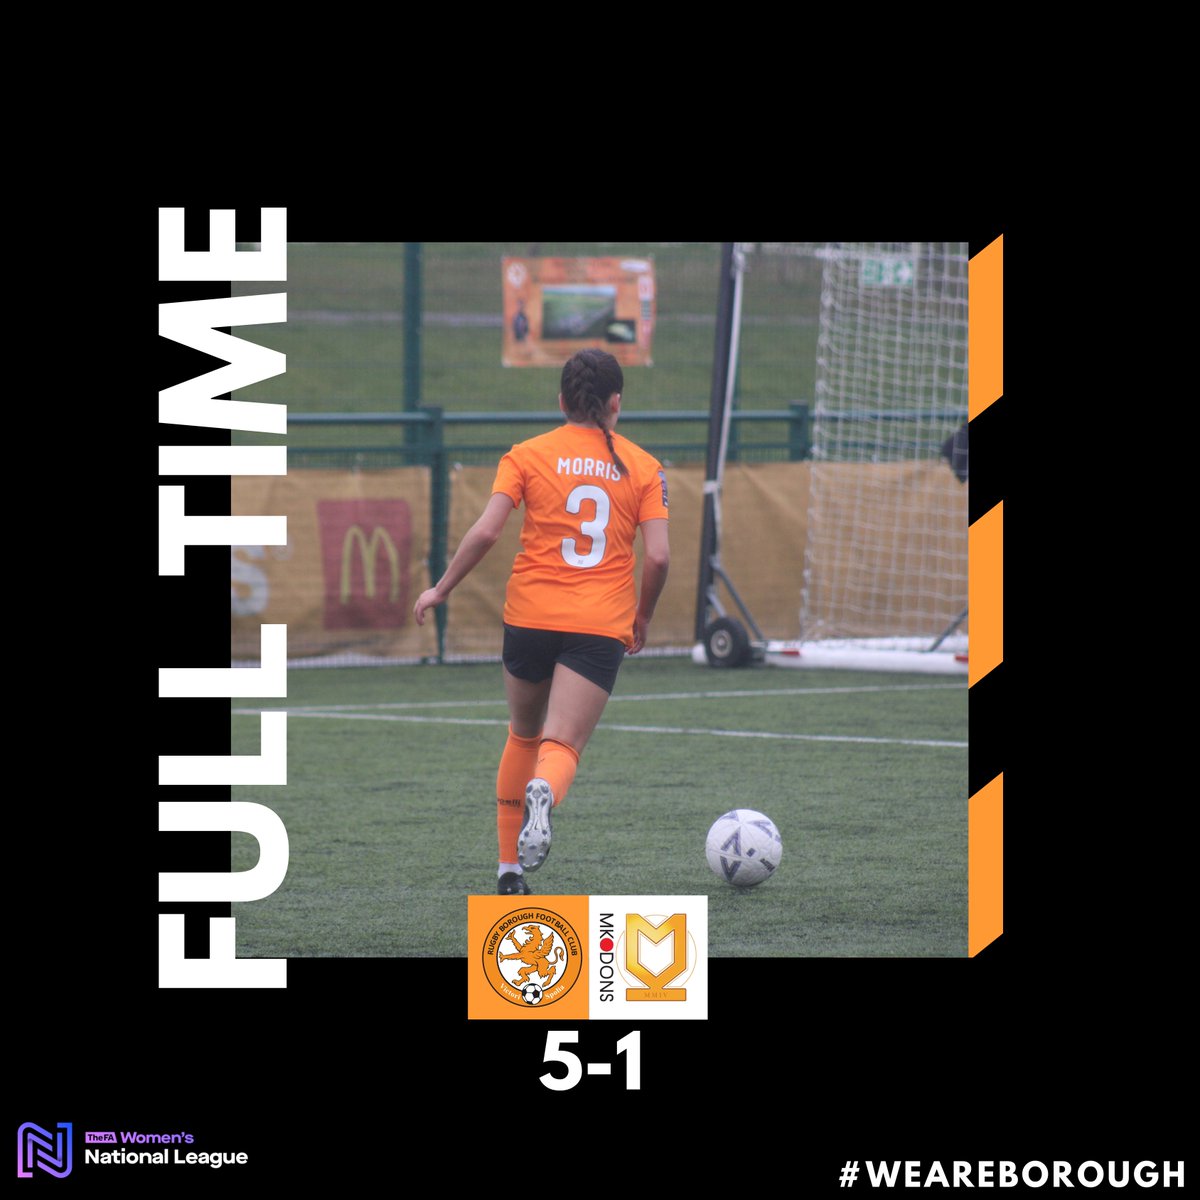 FT: An emphatic victory, with a performance to match. Curwood-Wagner ⚽ Mosby ⚽⚽ Potts ⚽ Greenslade ⚽ #RBWFC #WeAreBorough